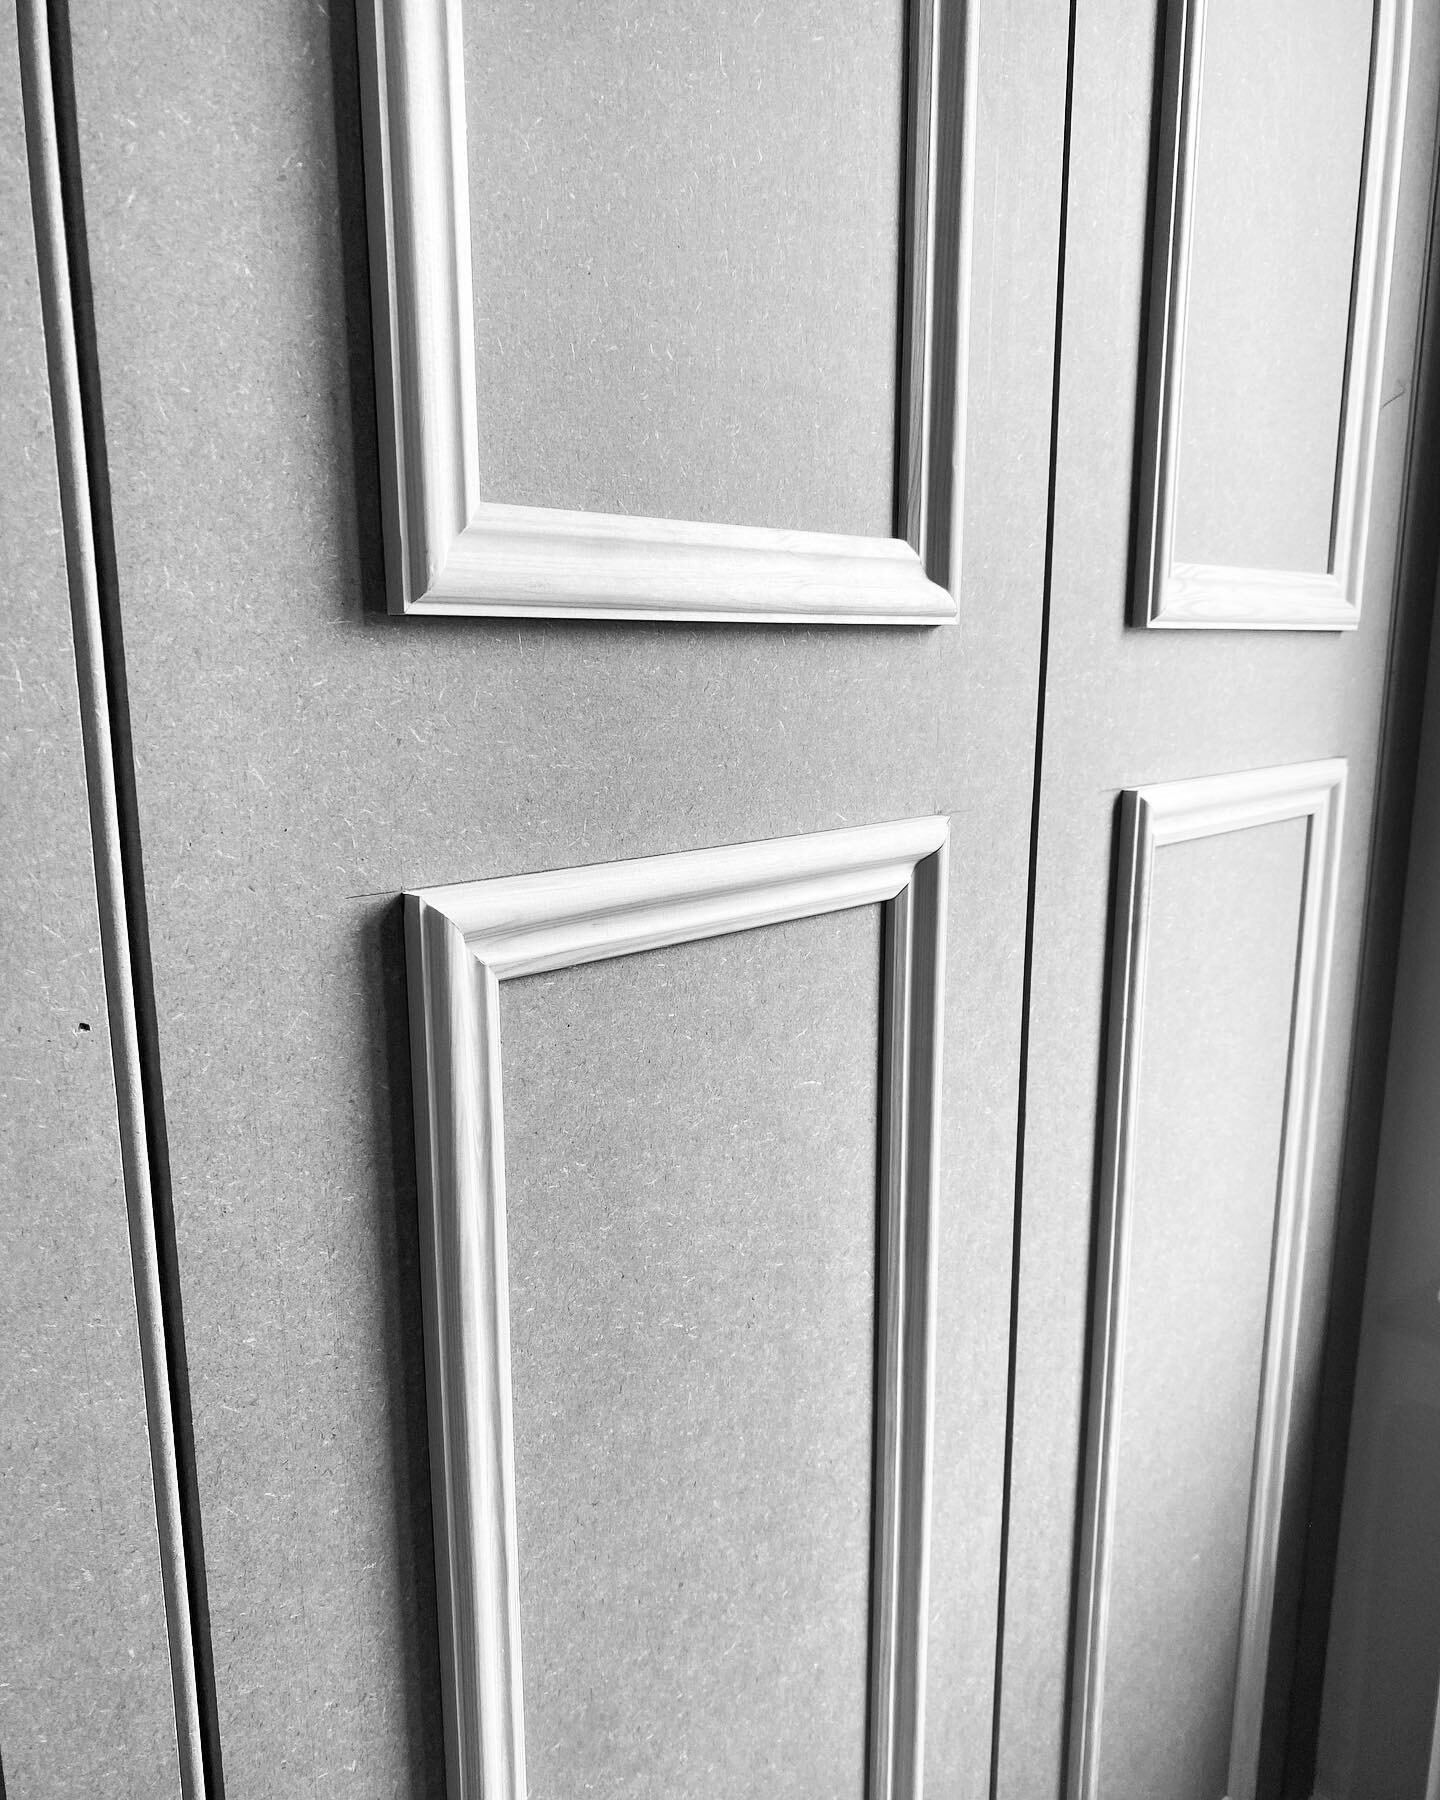 Three bespoke fitted wardrobes recently completed for our client. We made the most of the extra tall ceilings in this property, and made use of the unused alcove spaces. Ogee panel moulding detailing to the door frontals as this is a period property.